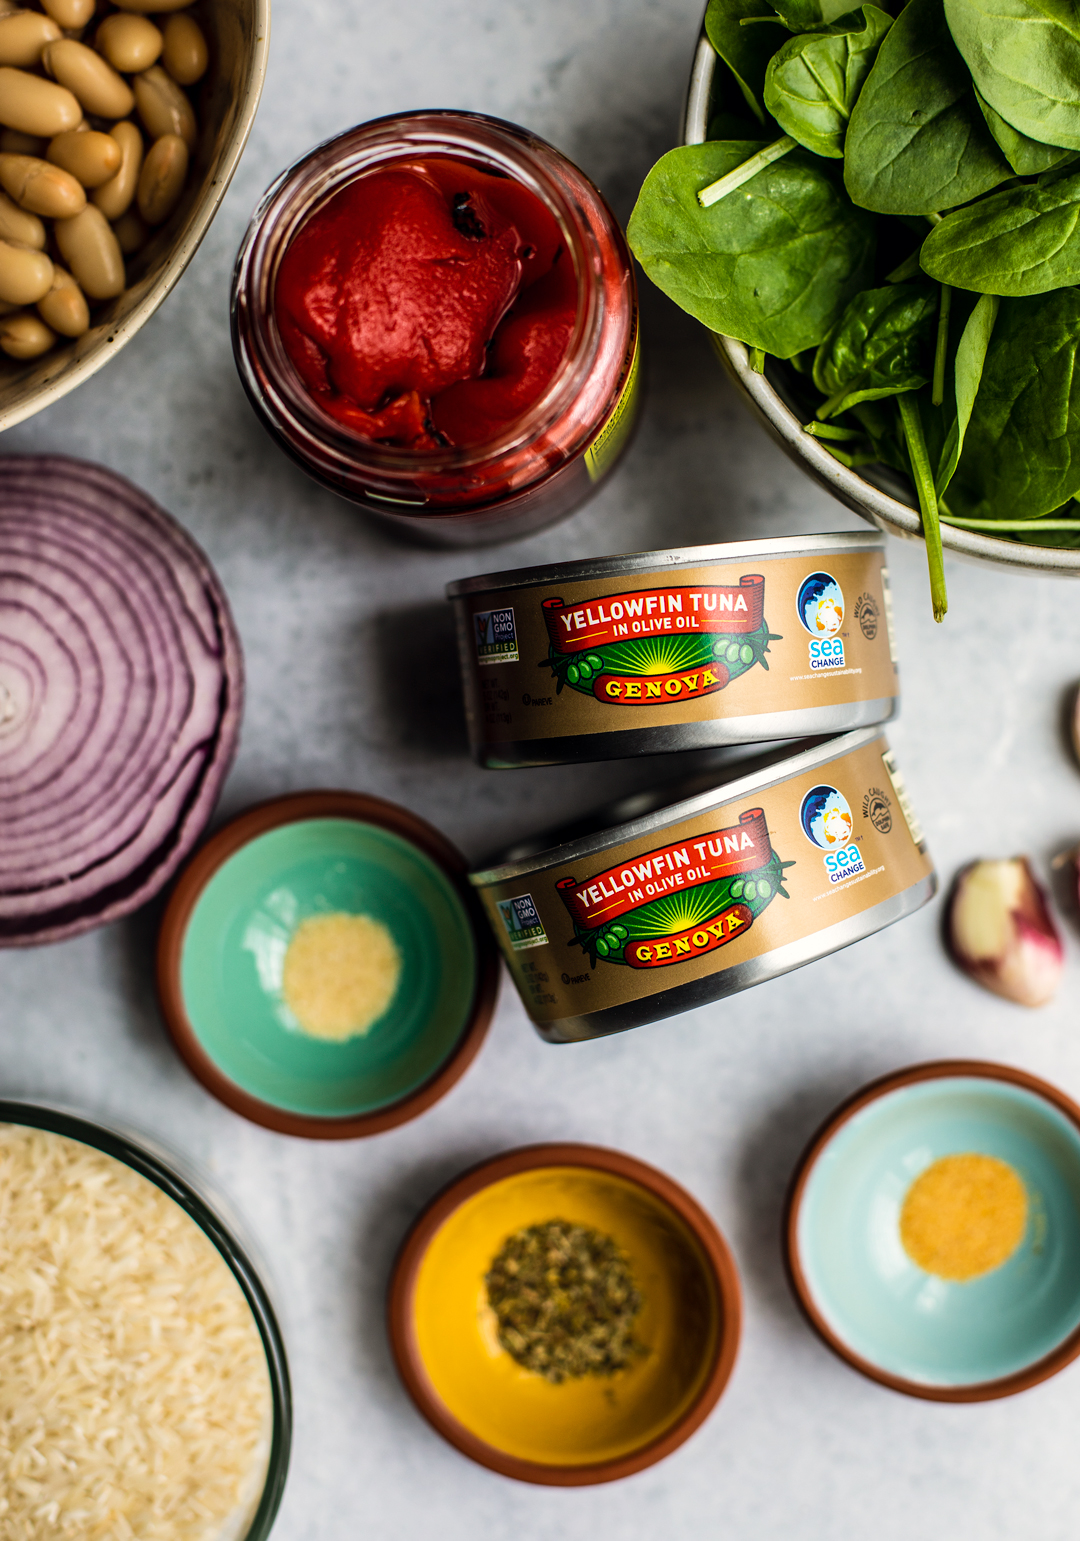 Two cans of Genova tuna with other bright and fresh ingredients.